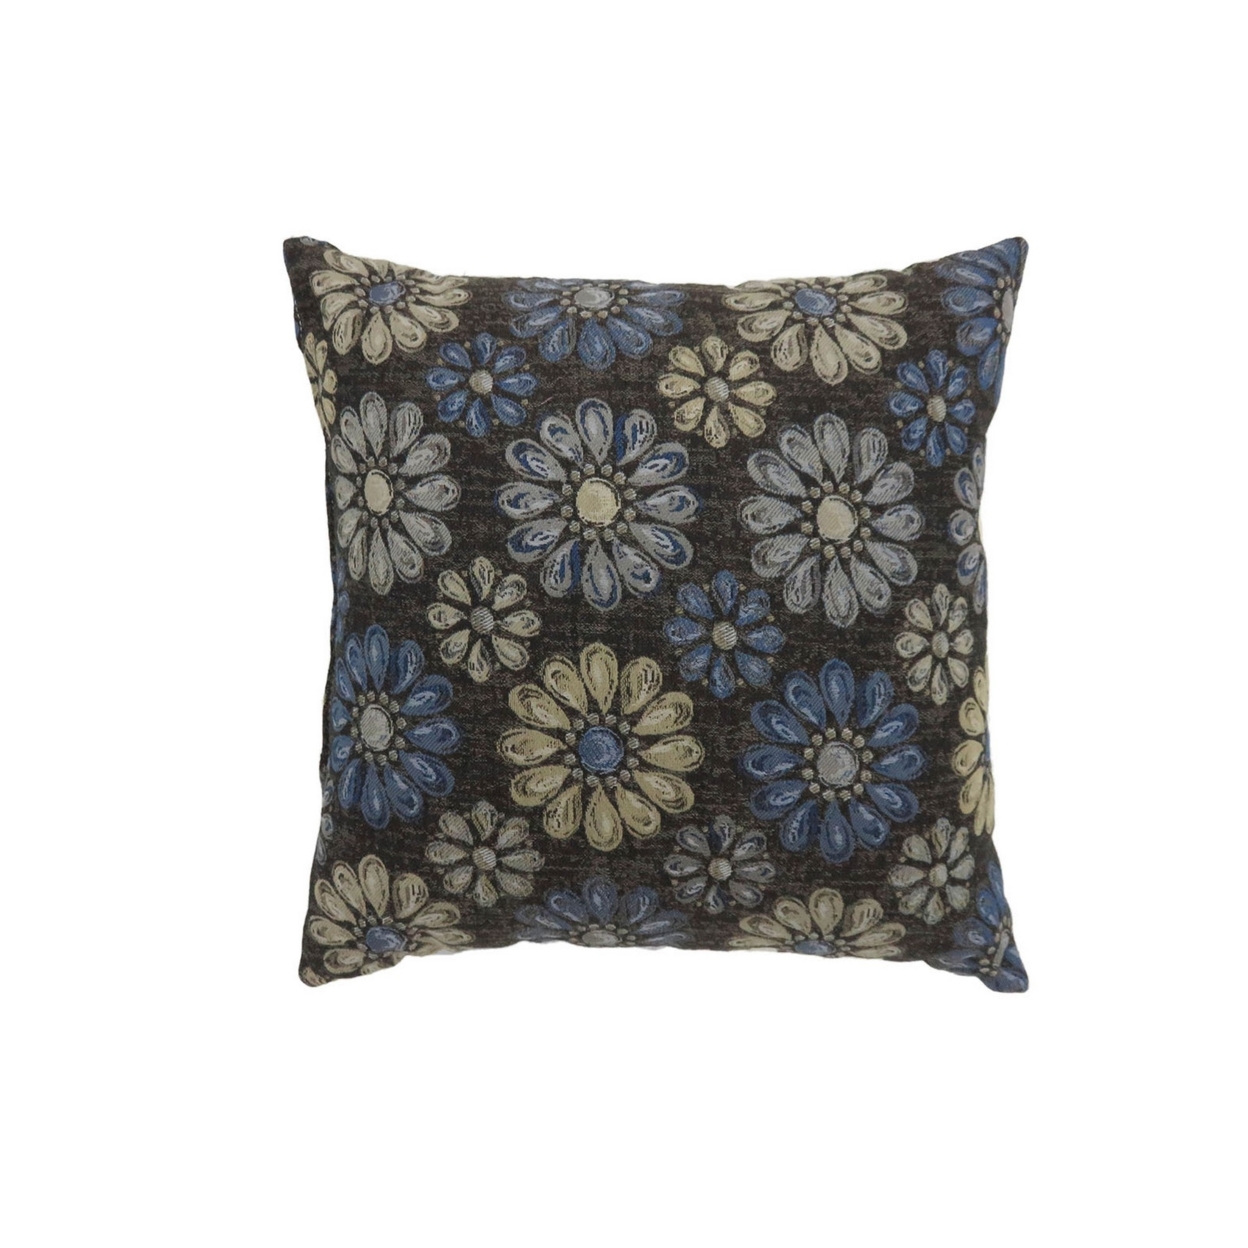 18 Inch Throw Pillow, Set Of 2, Polyester Floral Design Fabric, Dark Gray, Blue